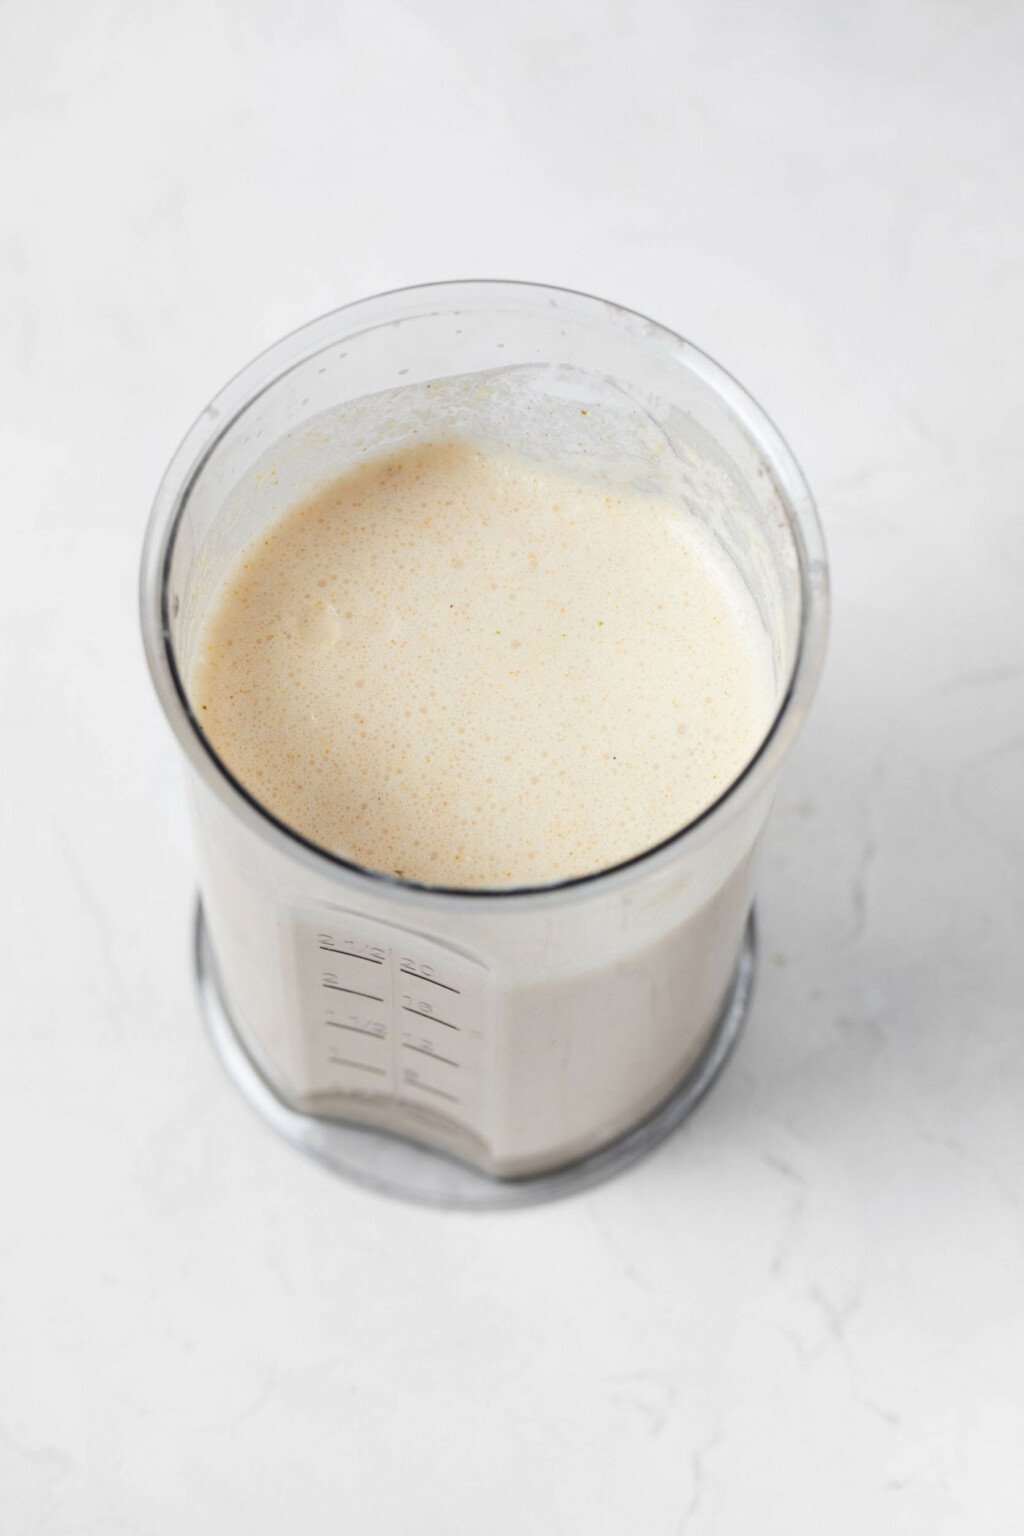 A creamy mixture is pictured in a personal blender.